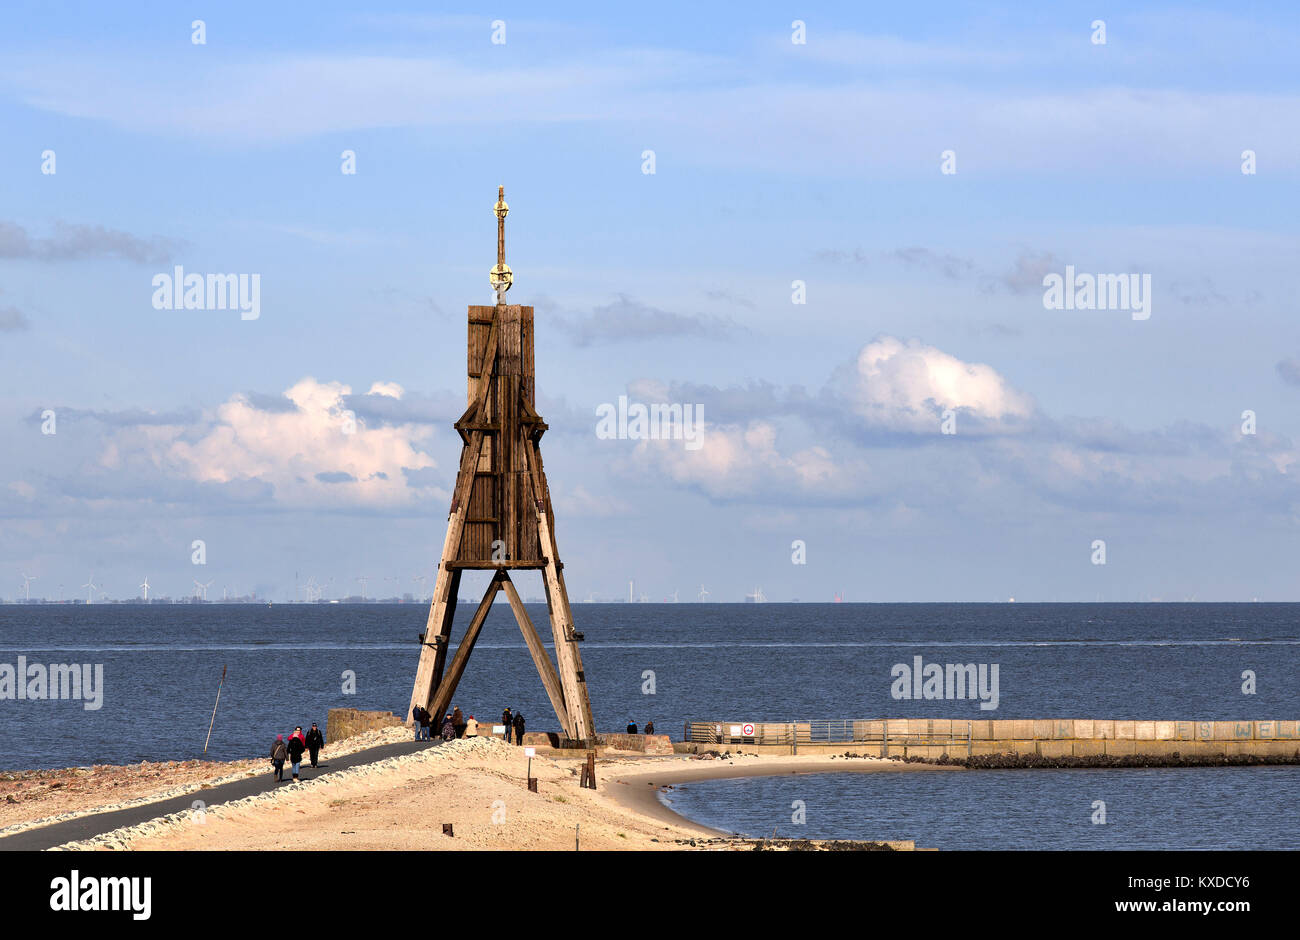 Kugelbake,mouth of the Elbe into the North Sea,landmark of the city of Cuxhaven,Lower Saxony,Germany Stock Photo